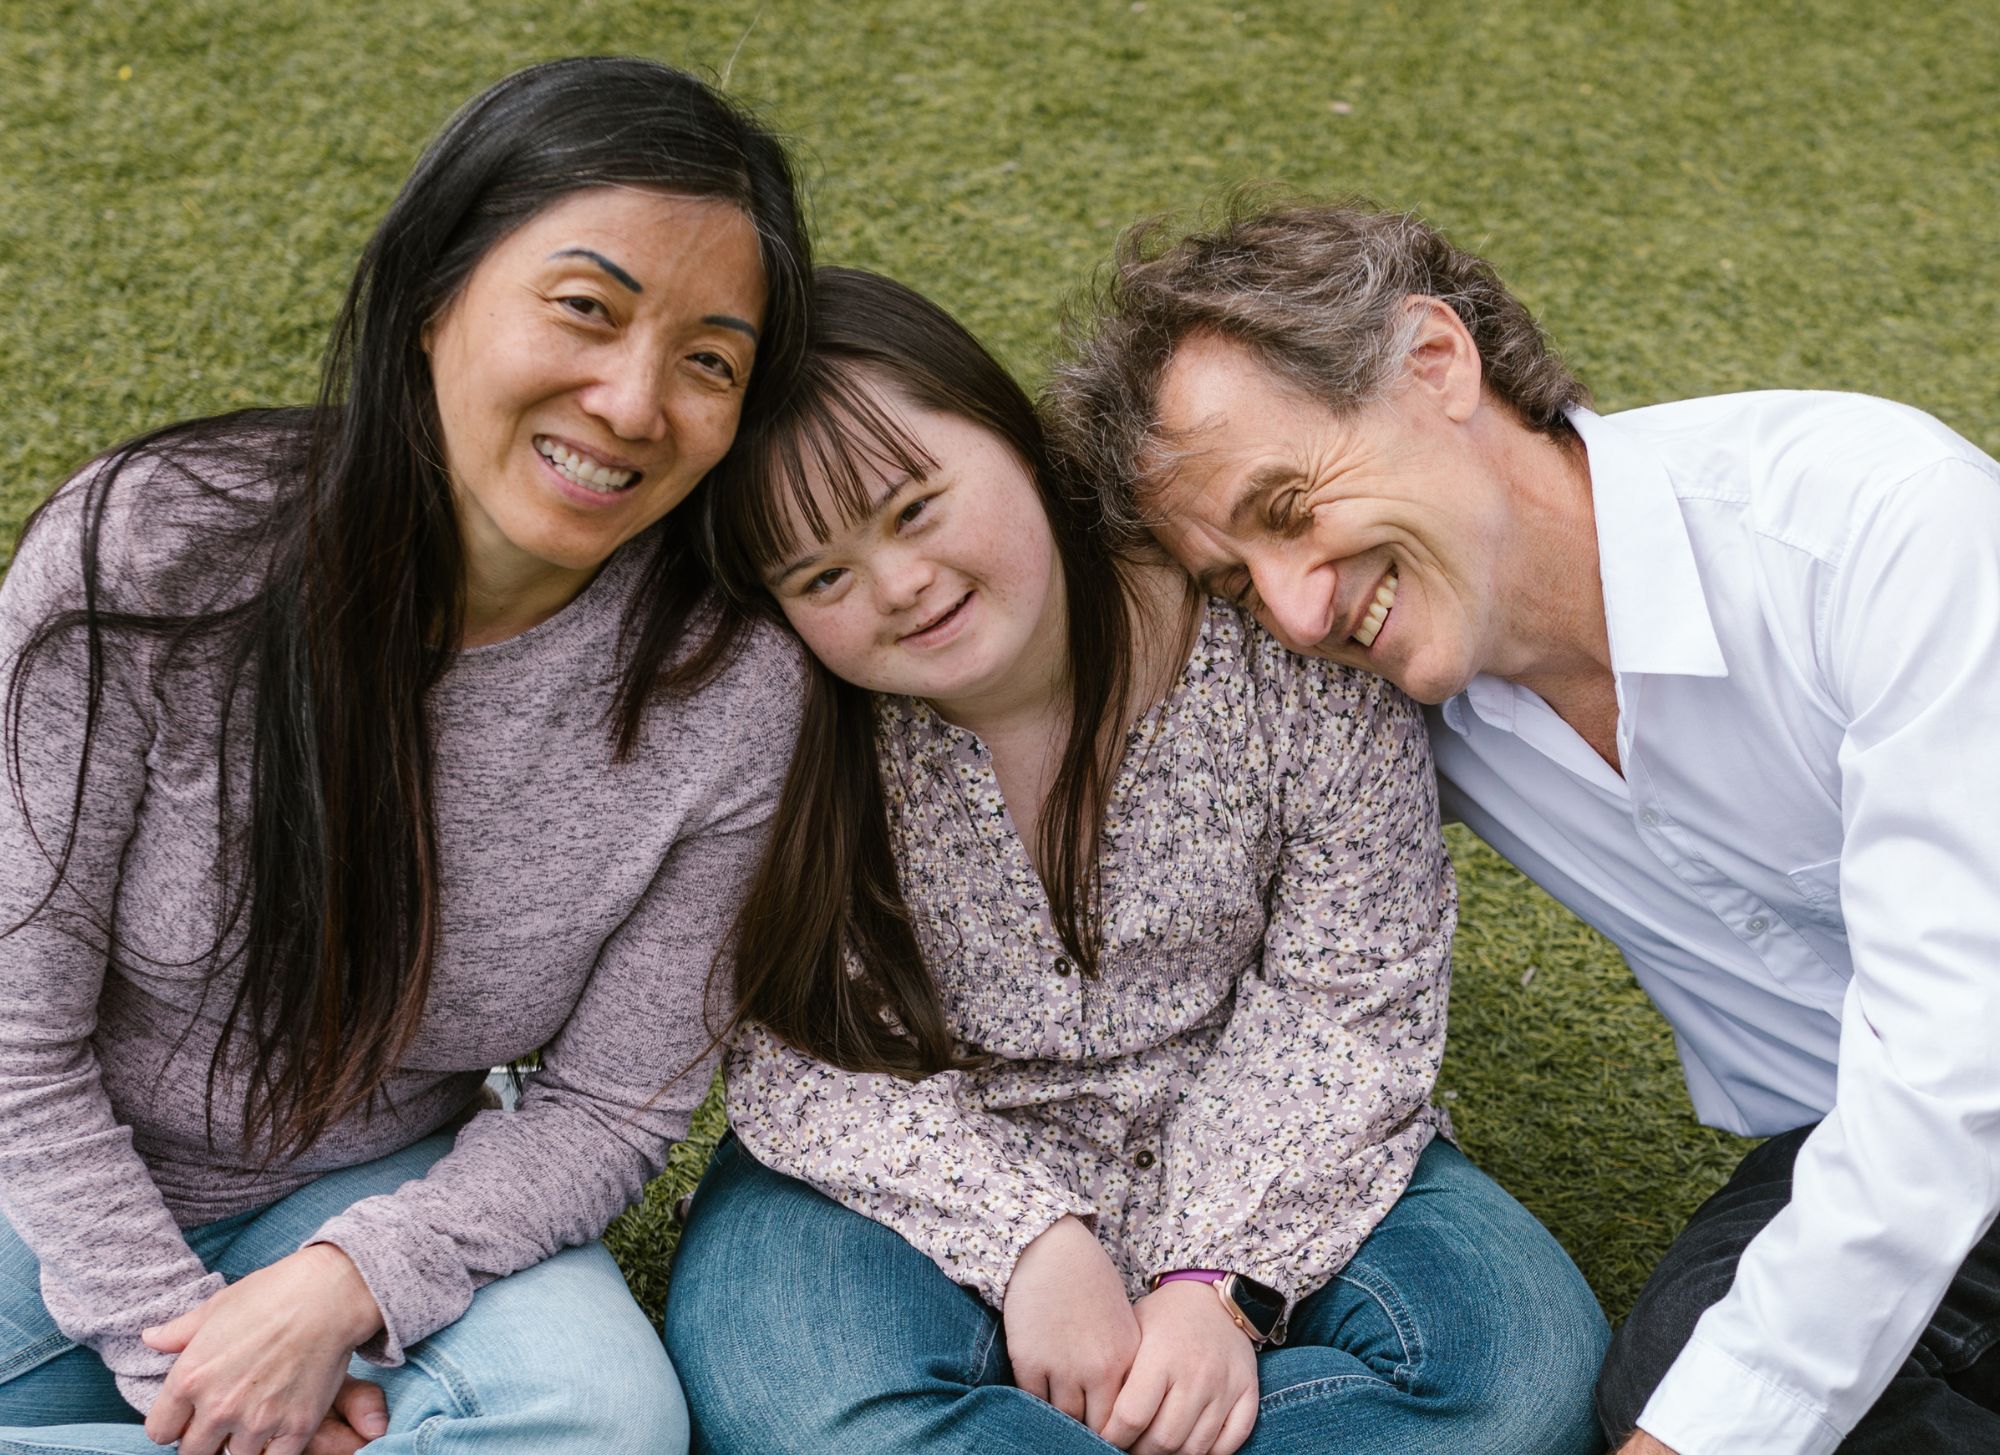 mother, daughter with down syndrome, and father smiling and sitting closely together